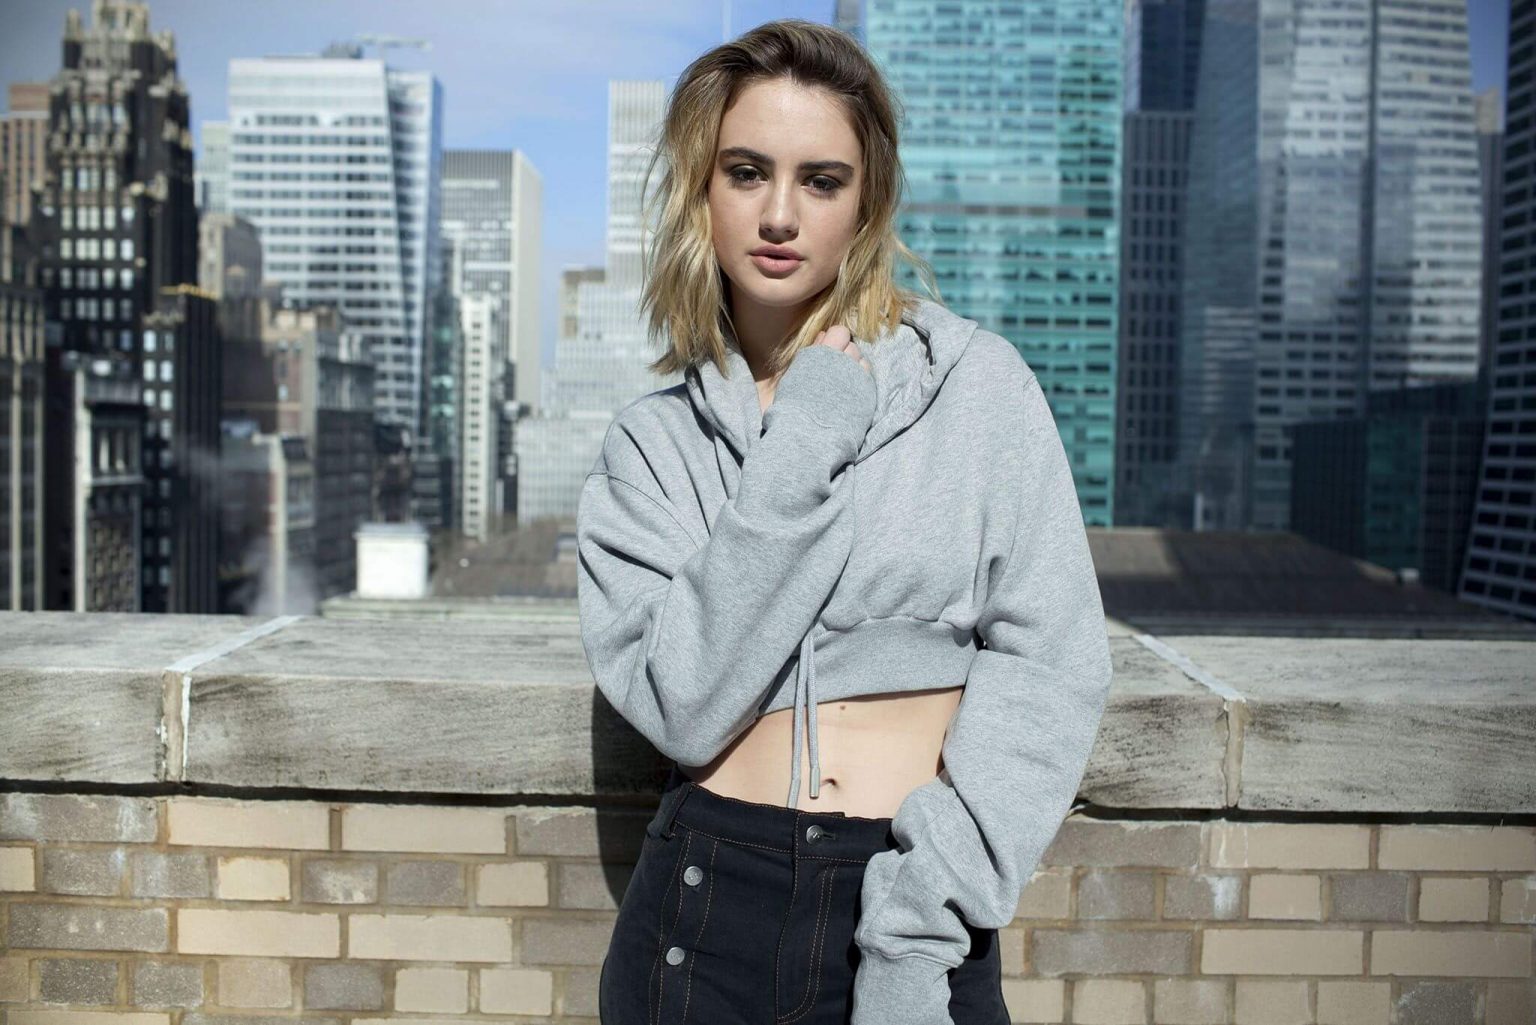 47 Grace Van Patten Nude Pictures That Are Sure To Put Her Under The Spotlight 24